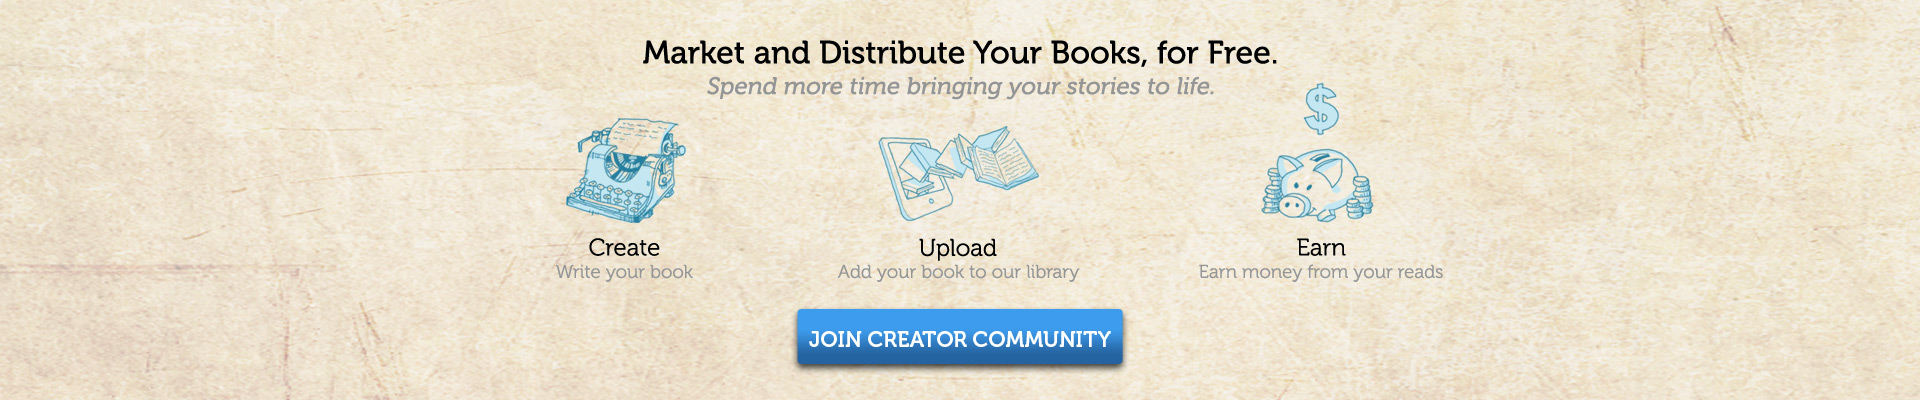 Market and Distribute your Books, for FREE!